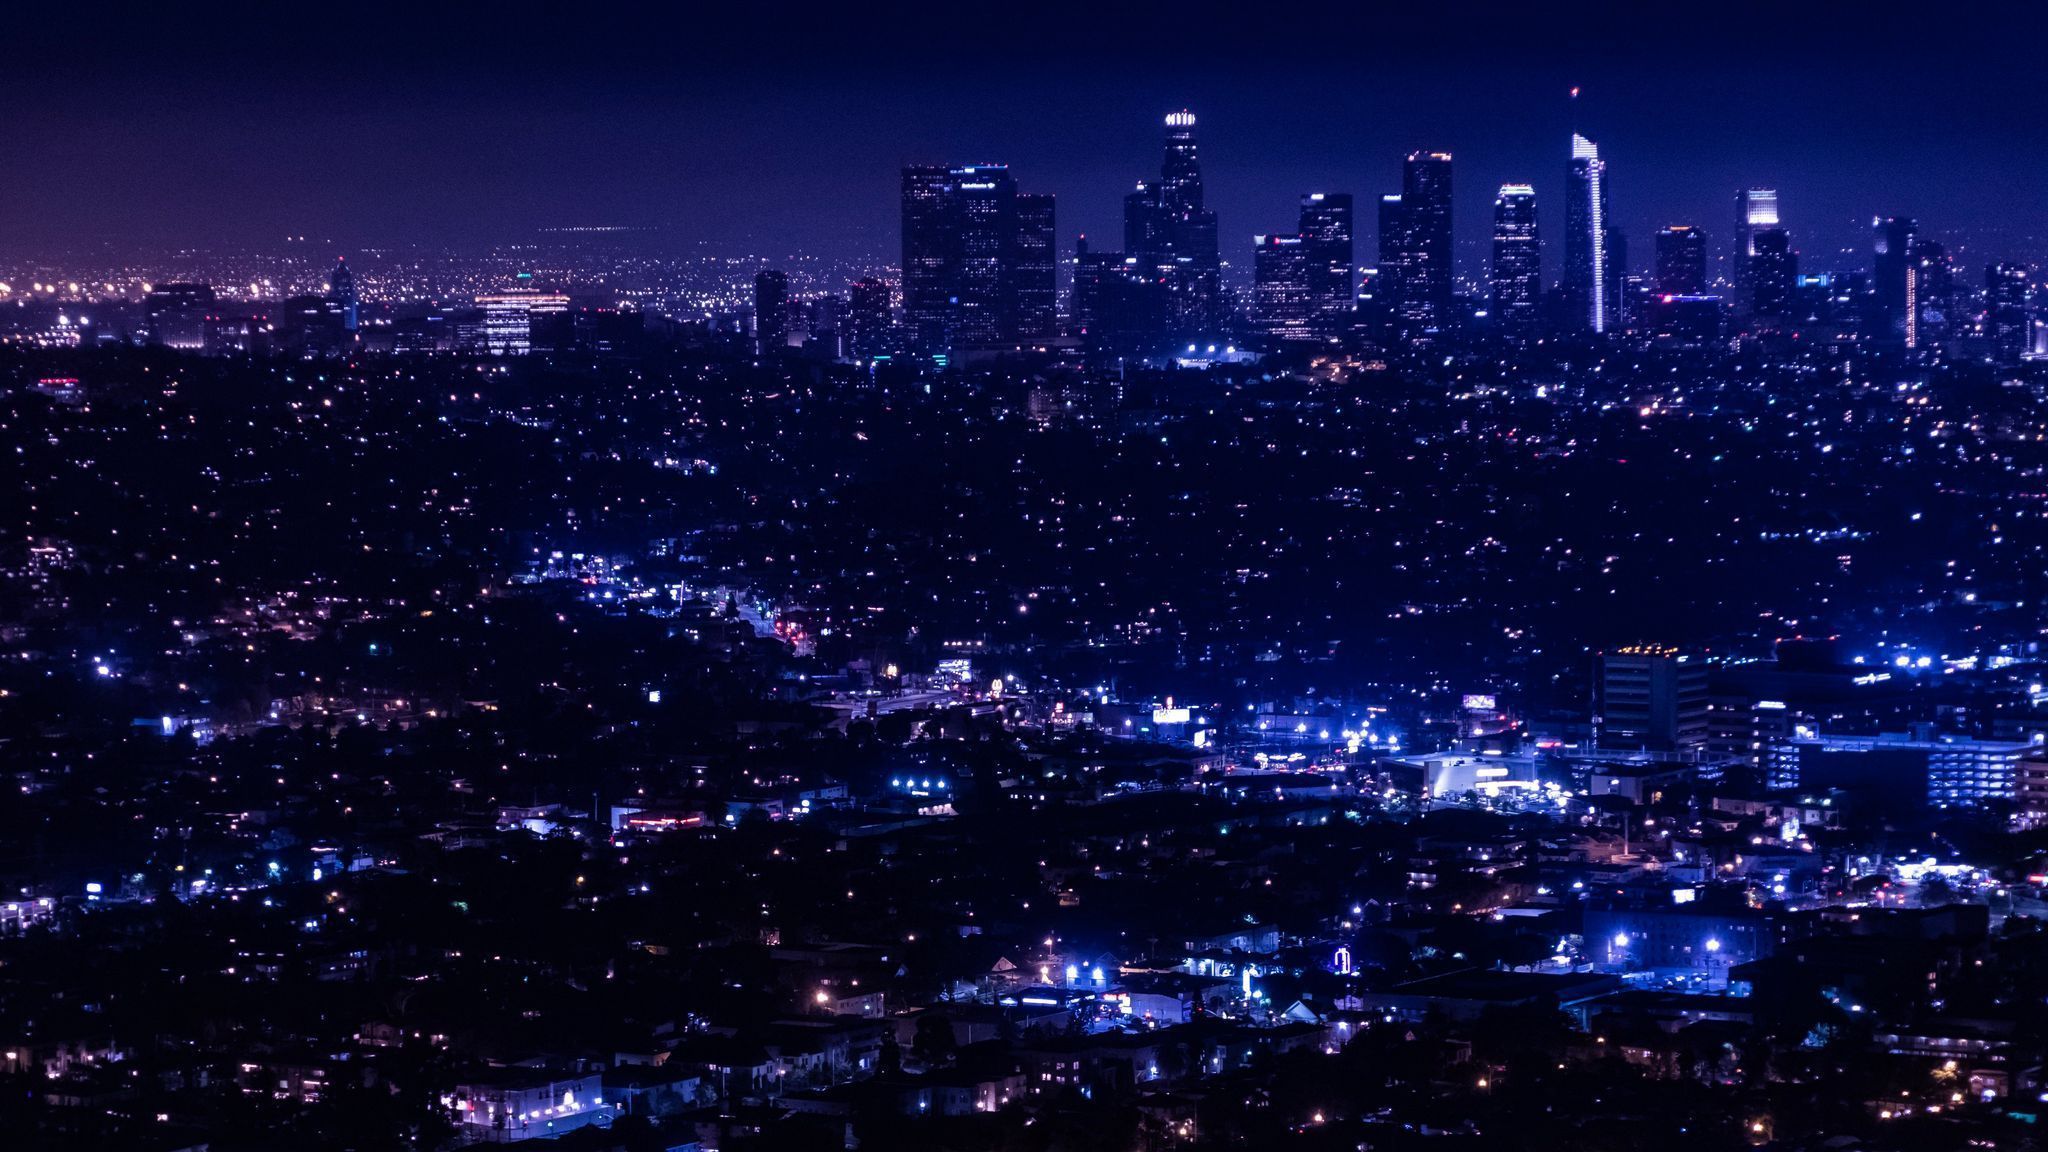 A city skyline at night with lights - 2048x1152